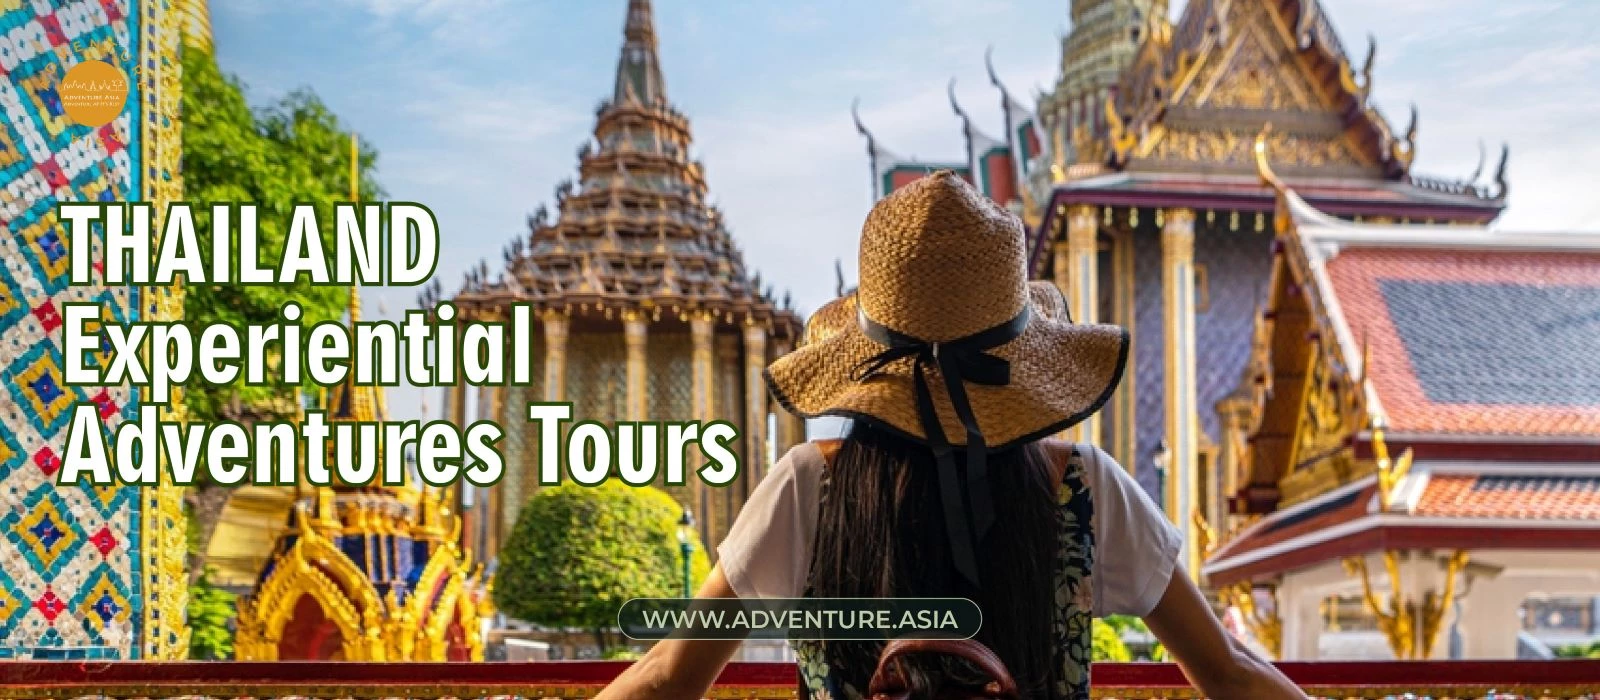 An overview of Thailand adventure tours for experiential travel enthusiasts